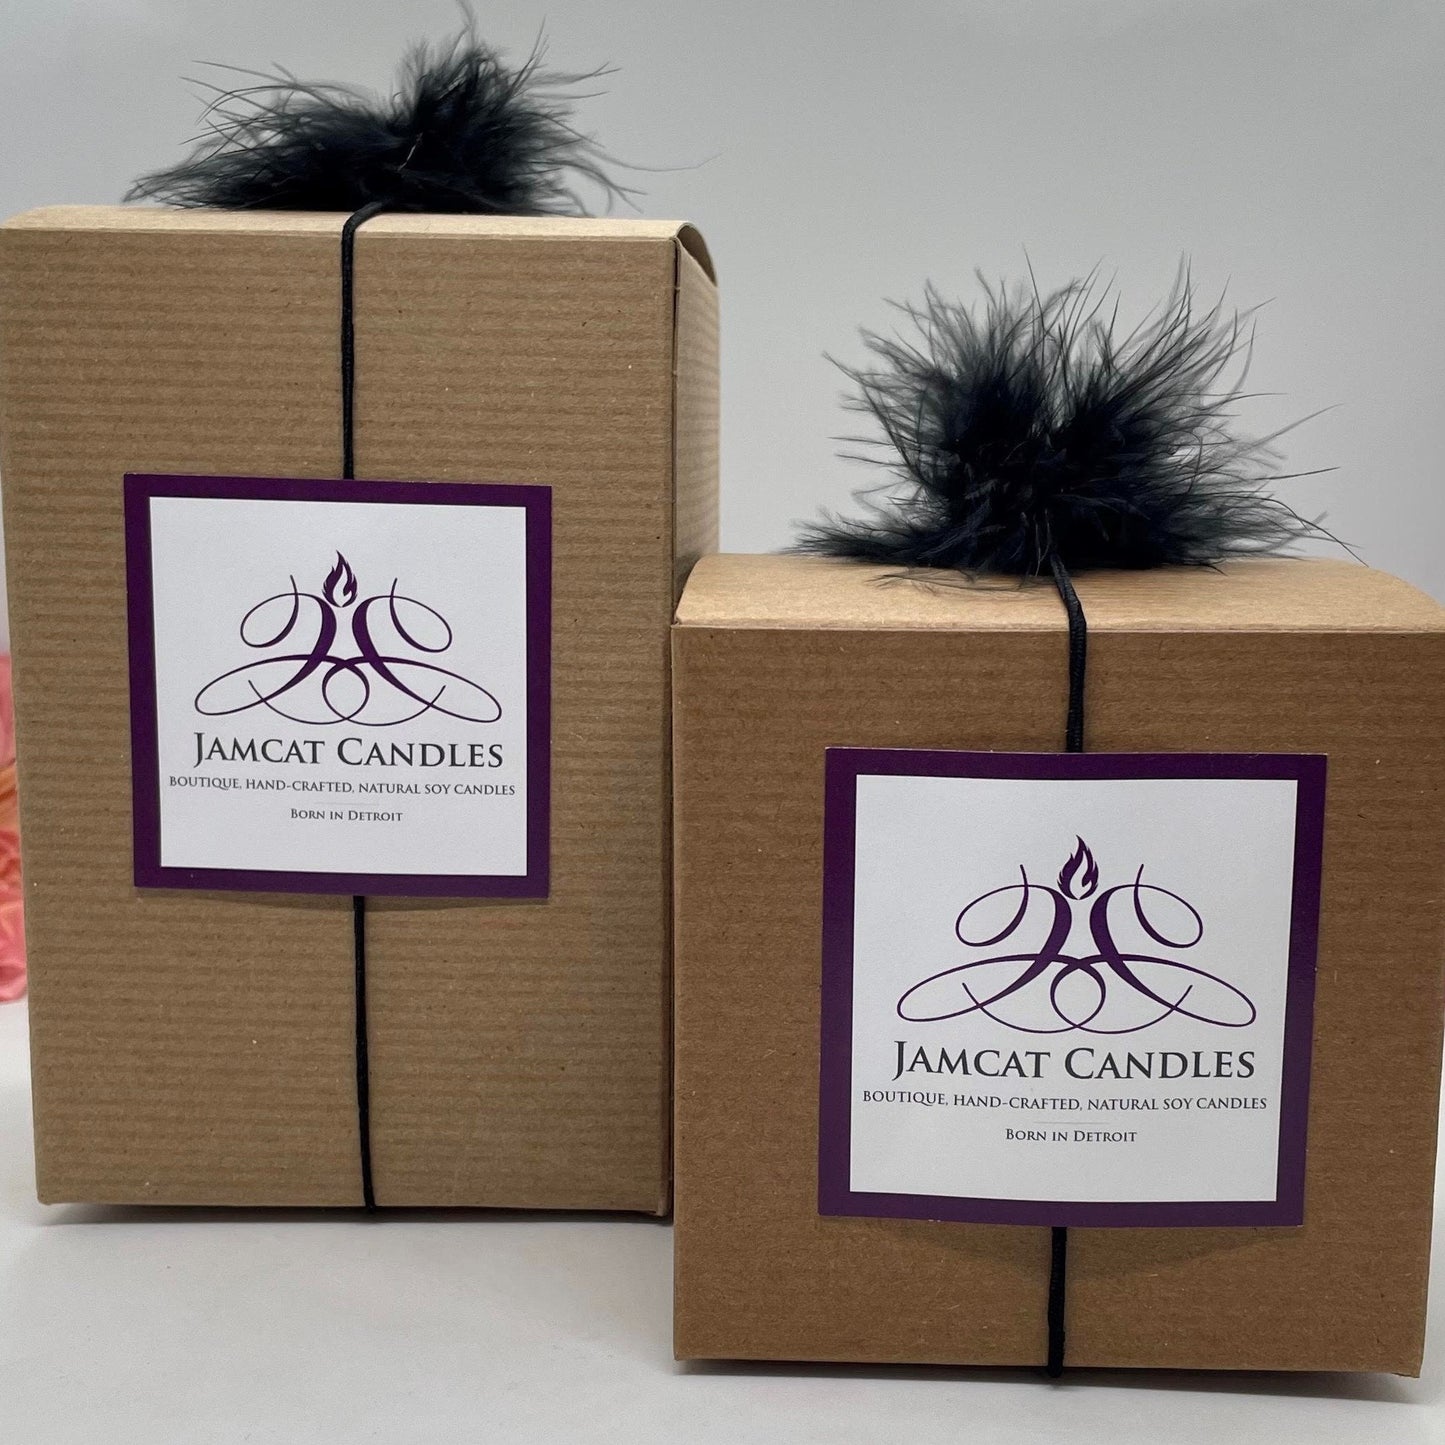 LE CHIC (with JEWEL or LABEL) - Jamcat Candles